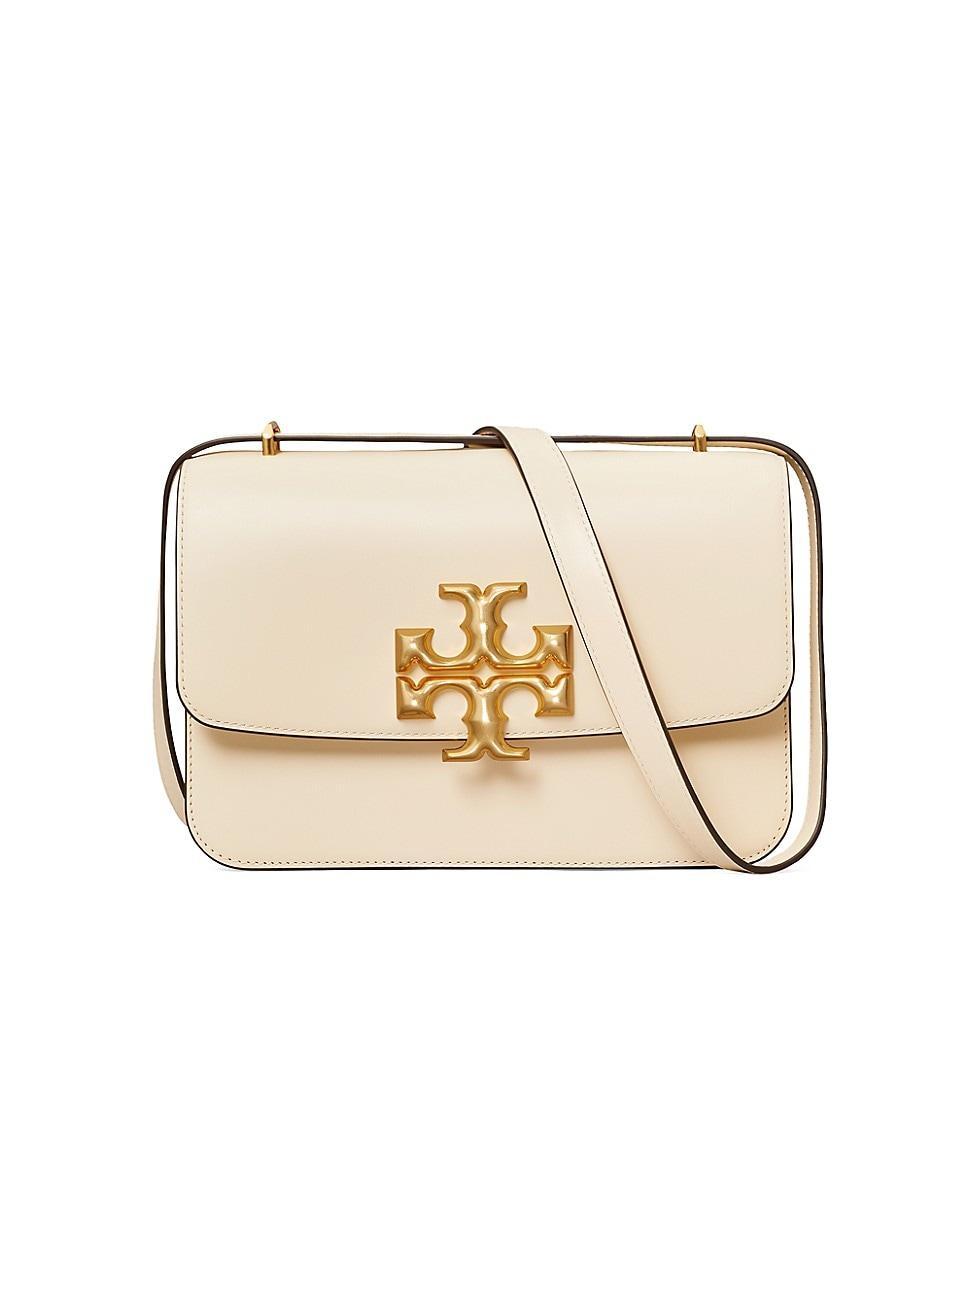 Tory Burch Eleanor Leather Shoulder Bag Product Image